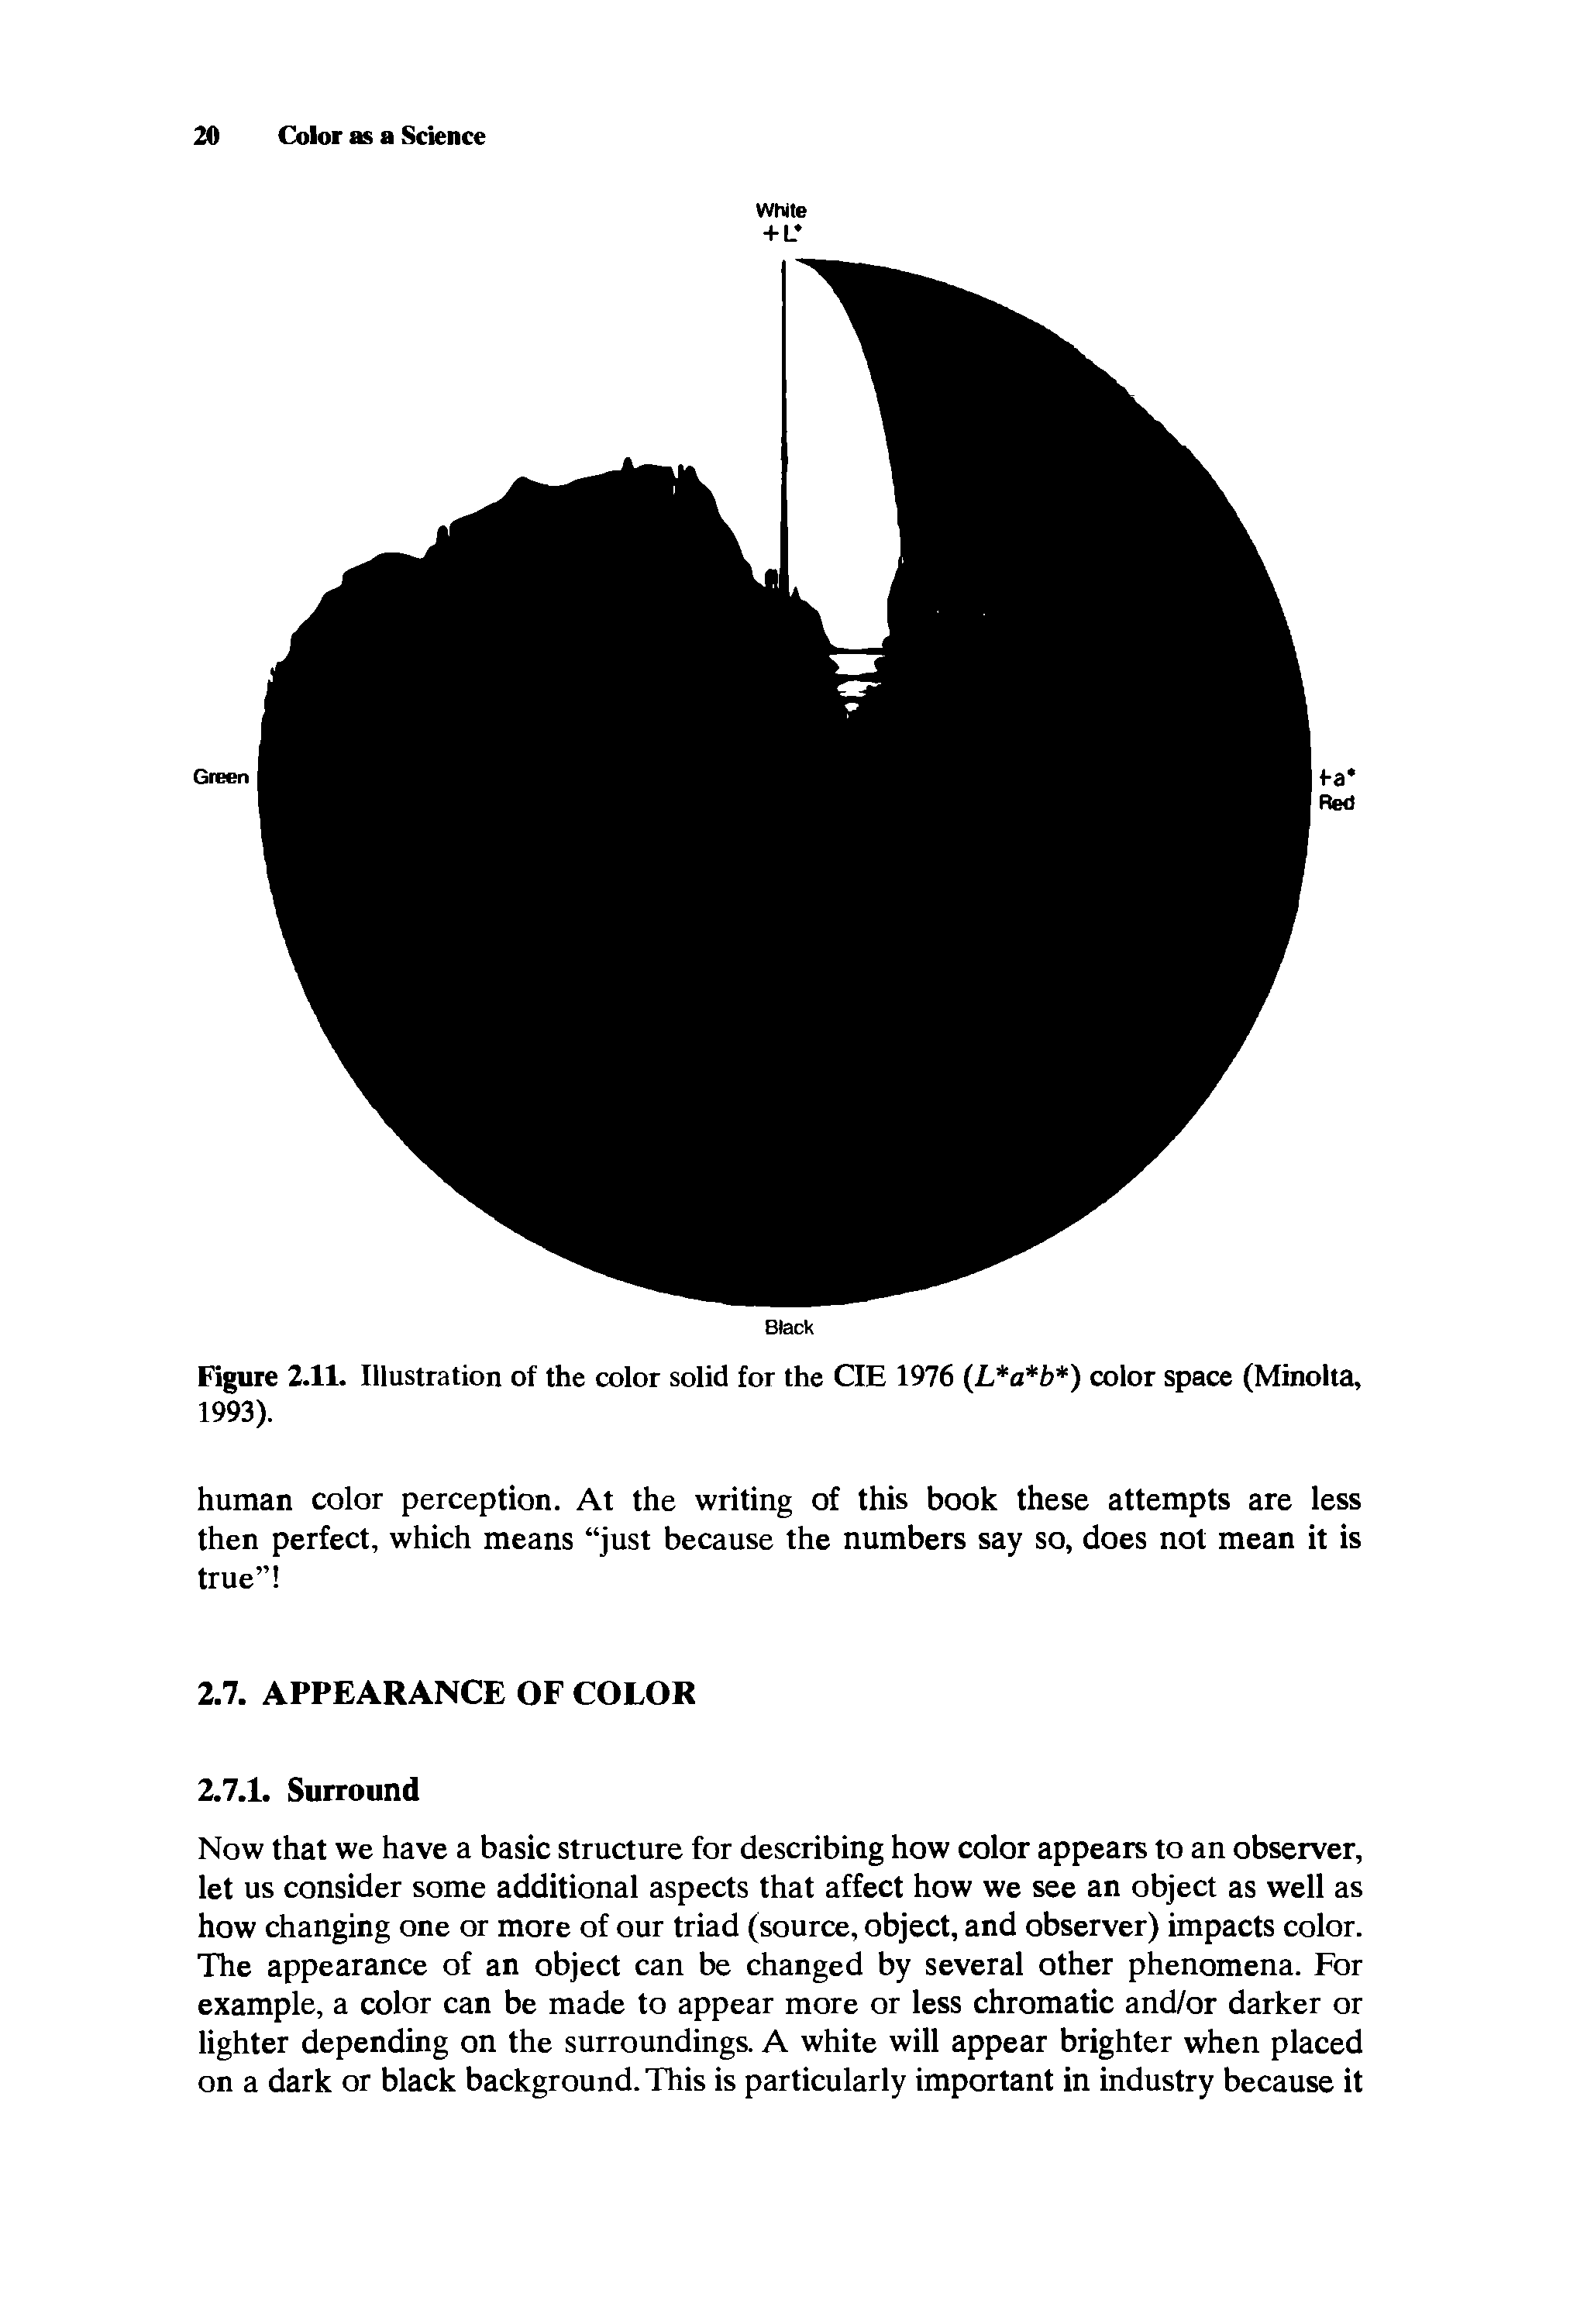 Figure 2.11. Illustration of the color solid for the CIE 1976 (L a b ) color space (Minolta, 1993).